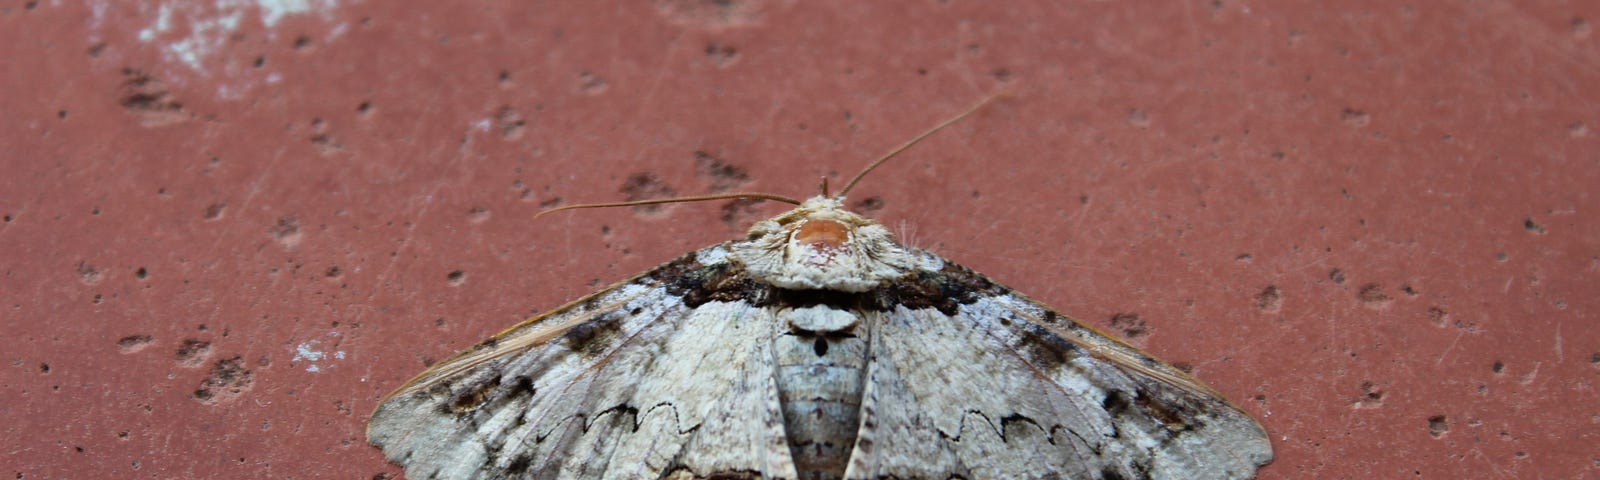 Photo of a white and beige moth with brown and black markings, positioned on a red concrete surface. The concrete is naturally pitted and indented, and has two white spots on the surface. The moth’s wings are spread widely, in a resting position.